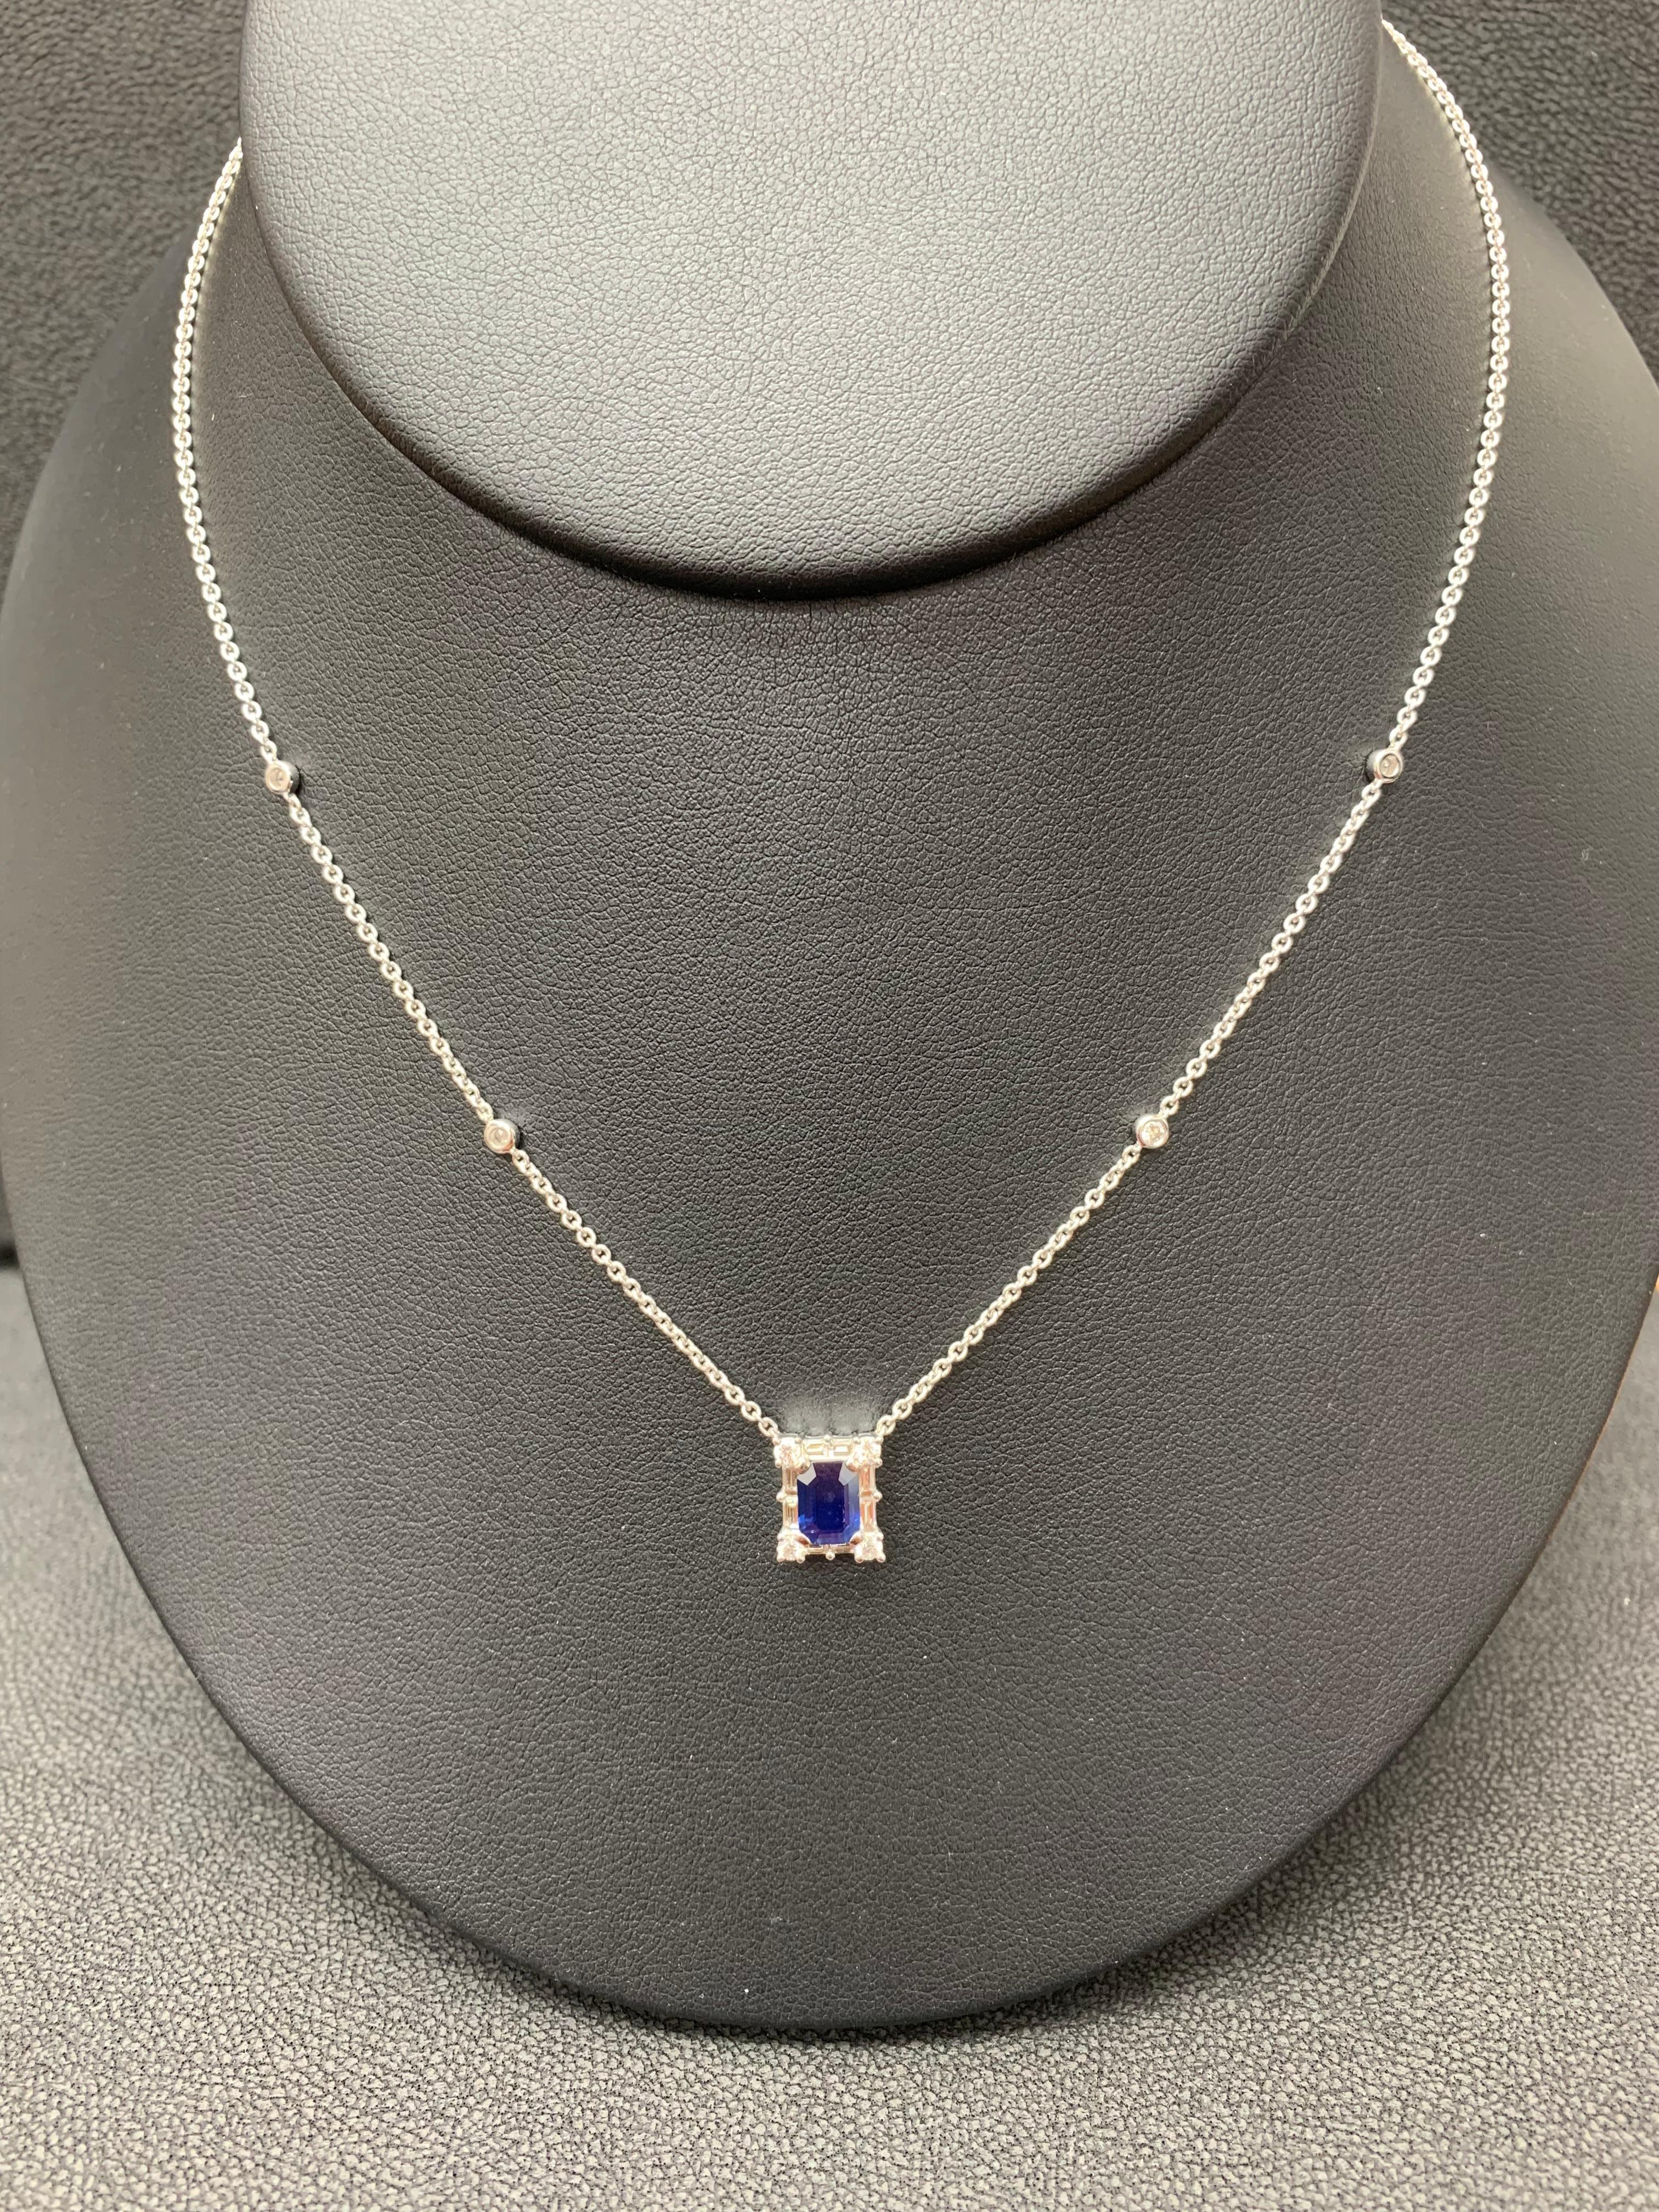 A fashionable pendant necklace showcasing a 0.72-carat emerald cut dark and vibrant blue color Sapphire. The center stone is surrounded by a row of brilliant-cut 8 round and 8 baguette diamonds weighing 0.58 carats total. Made in 18k white gold.